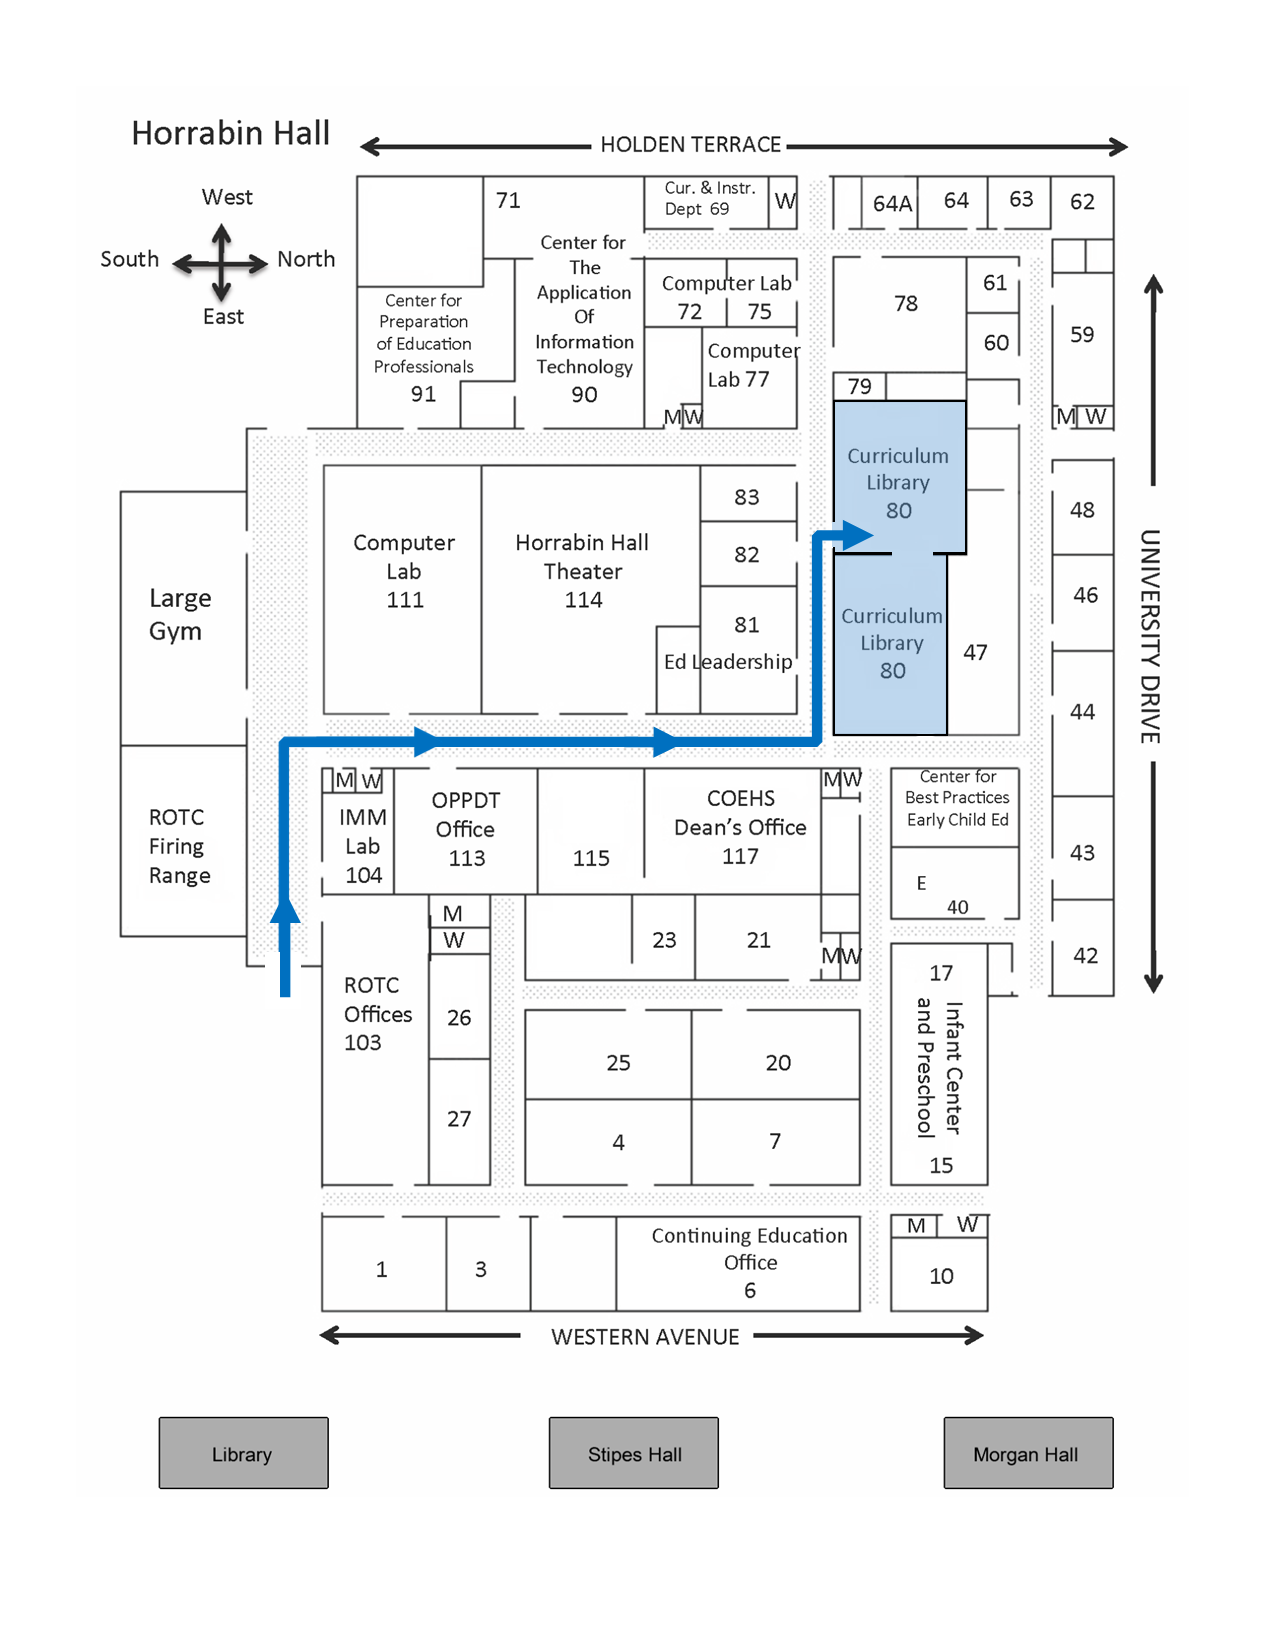 Map of Horrabin Hall (Curriculum Library in Room 80)